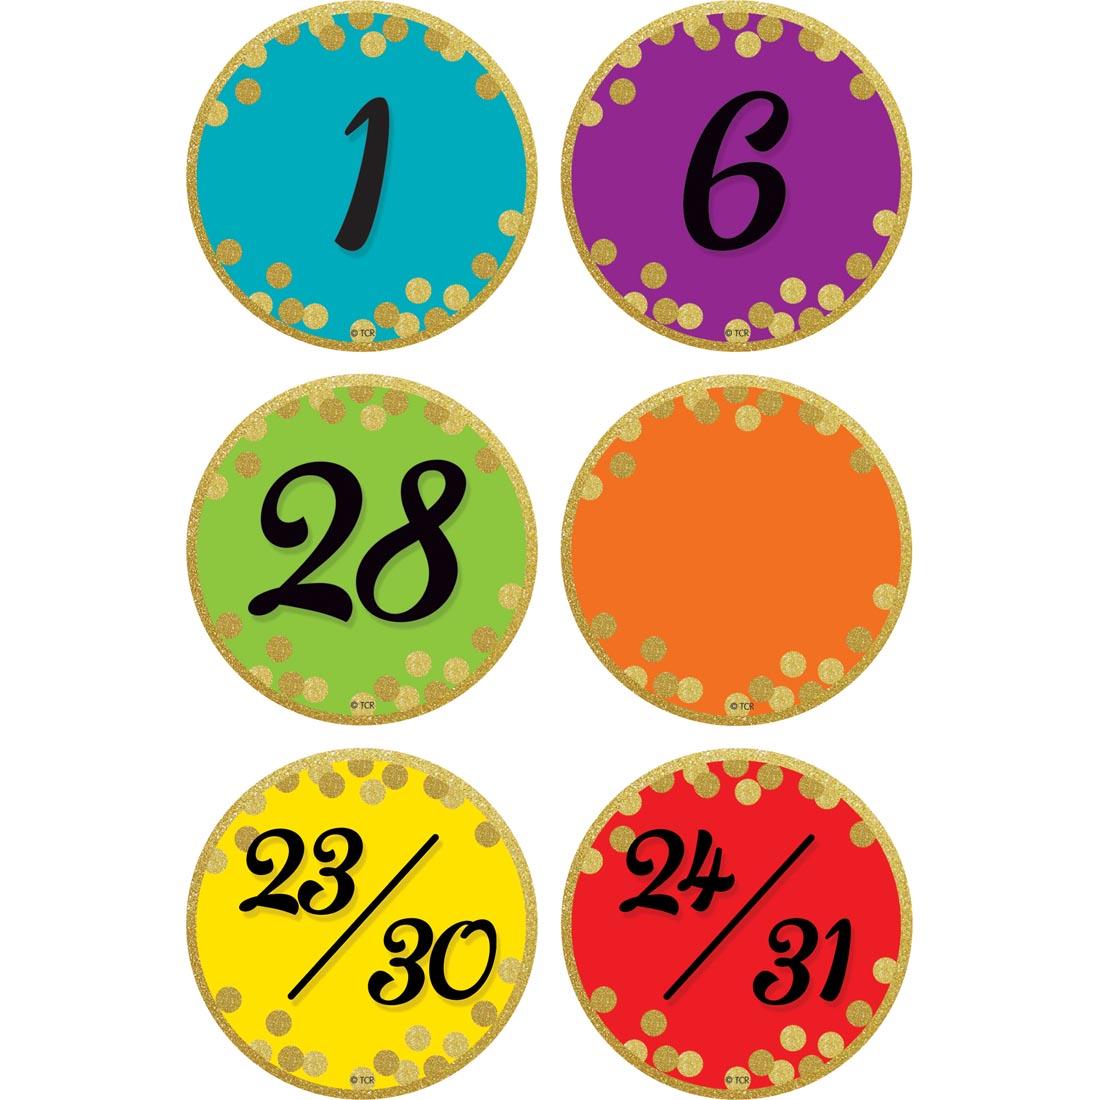 Colorful Calendar Days from the Confetti collection by Teacher Created Resources